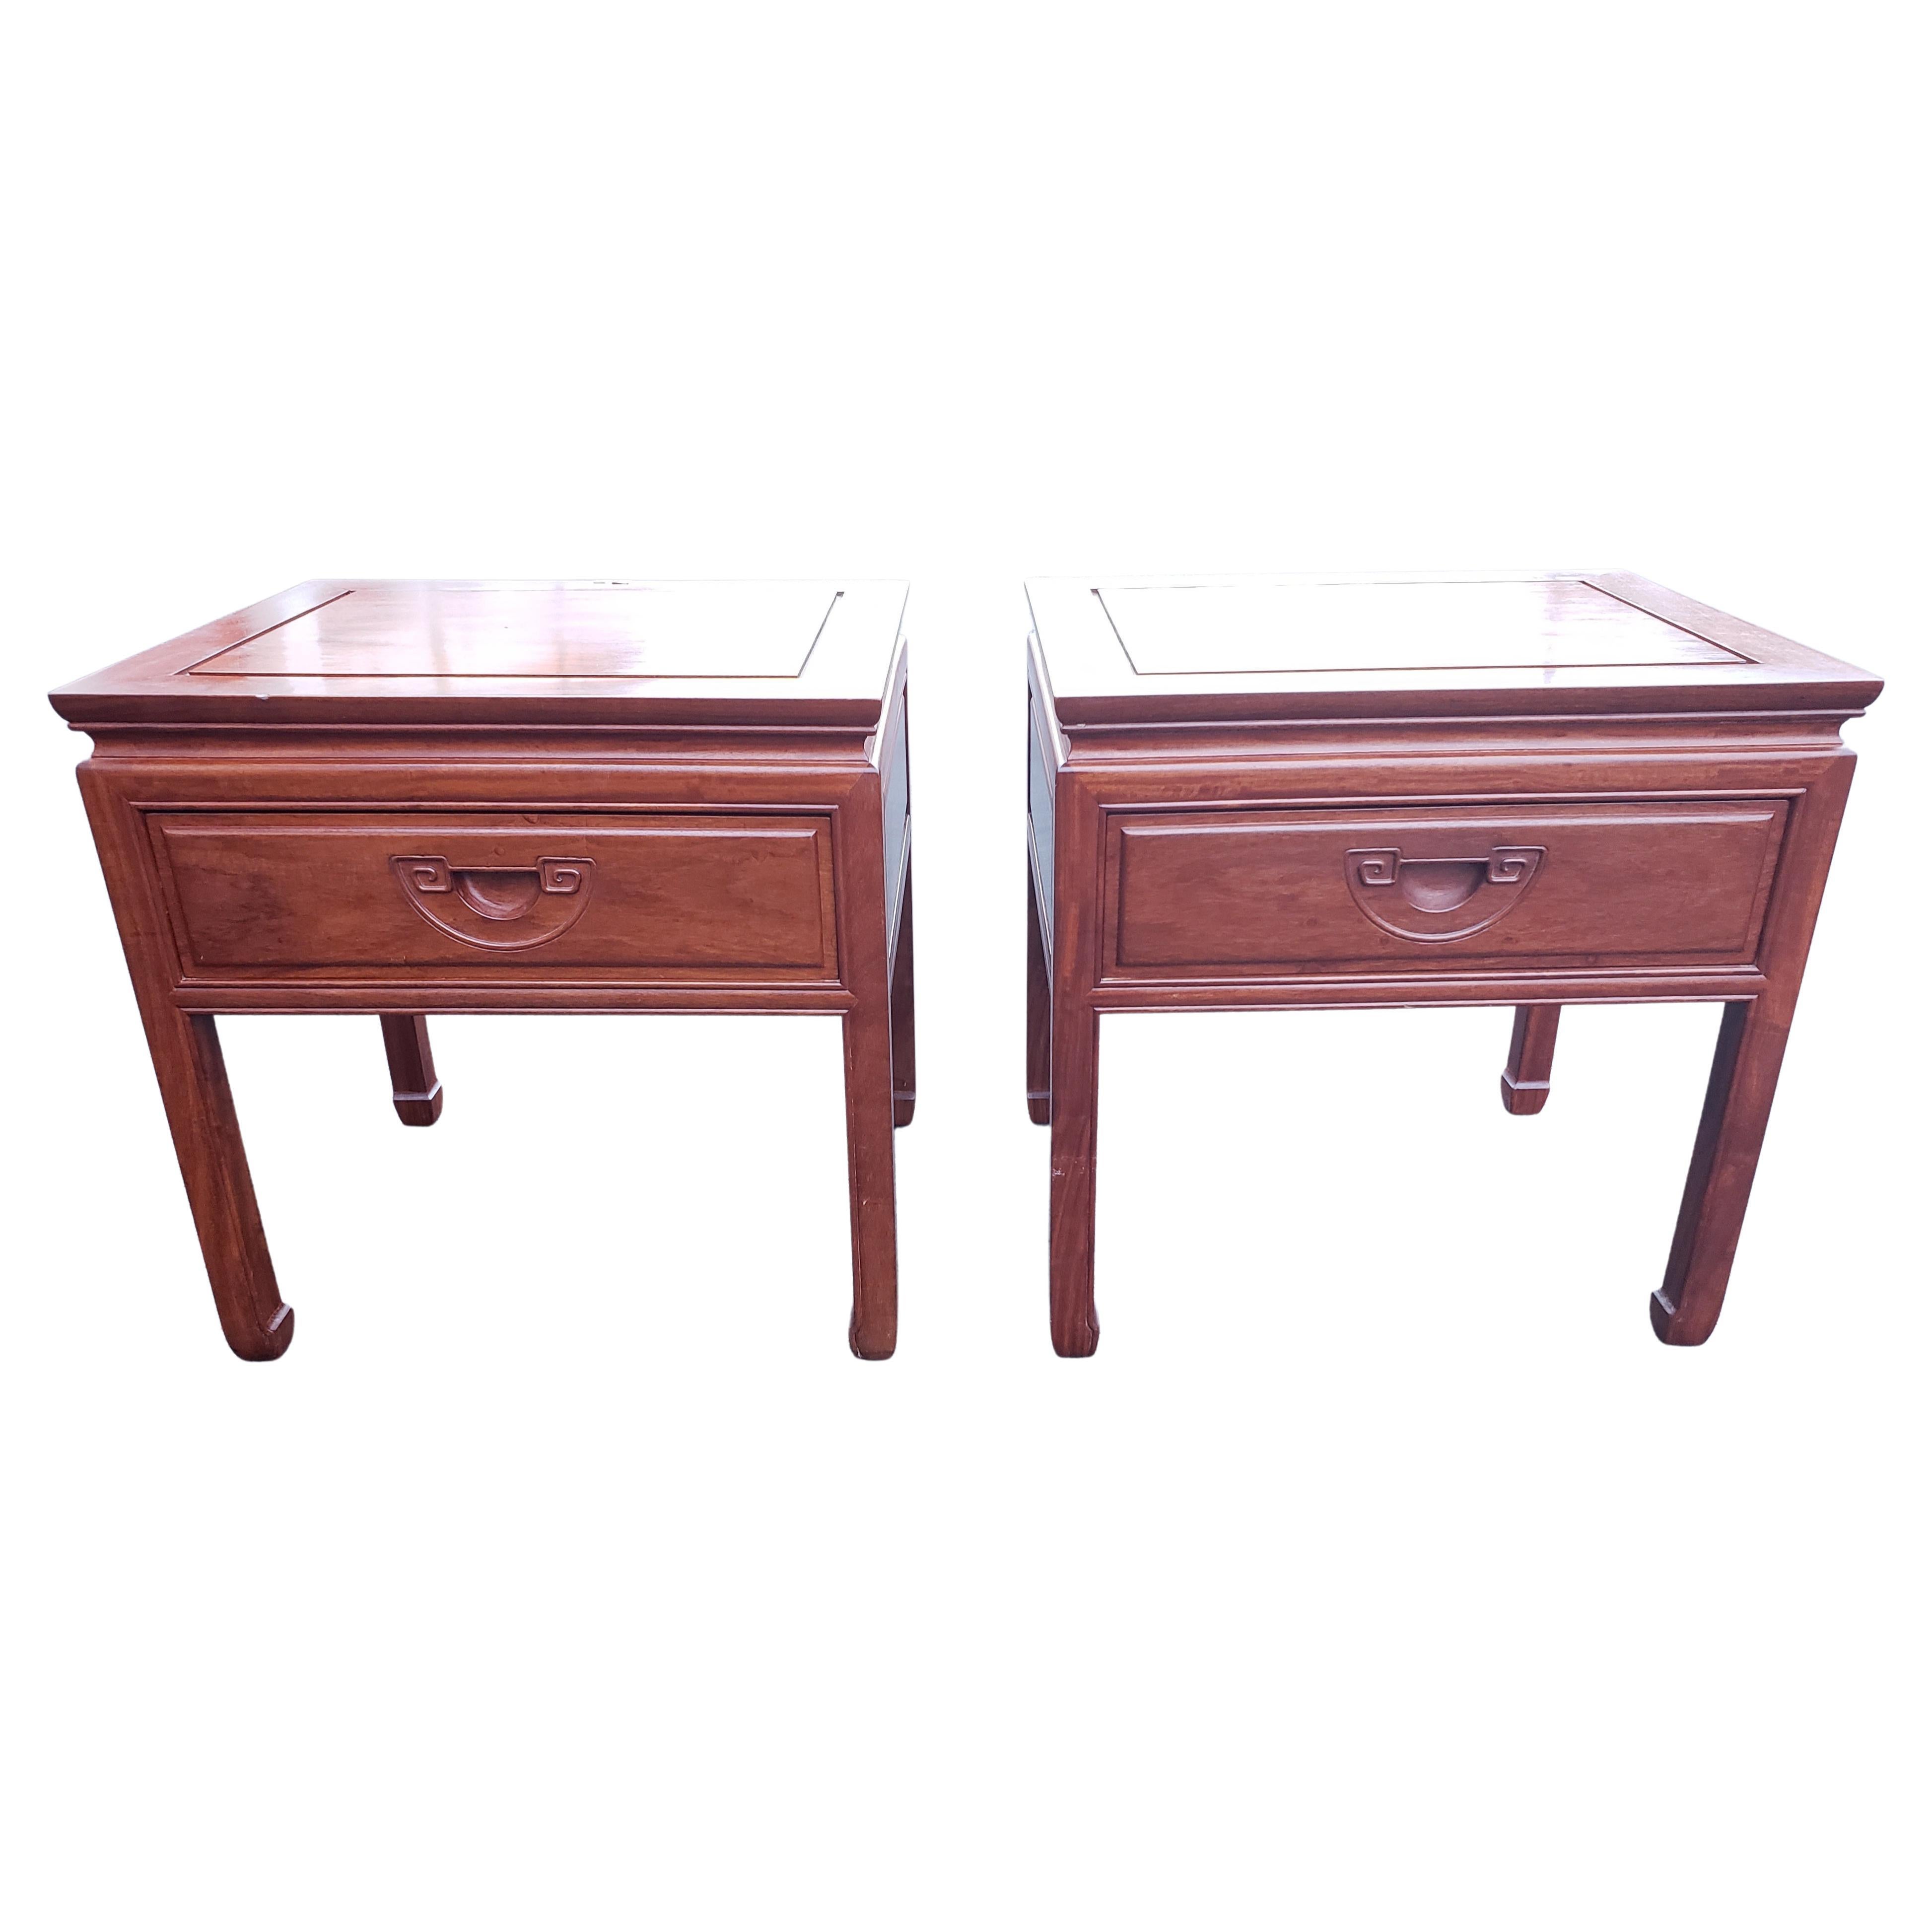 Tang George Zee Rosewood Hand Crafted Side Tables W Integrated Carved Handles, a Pair